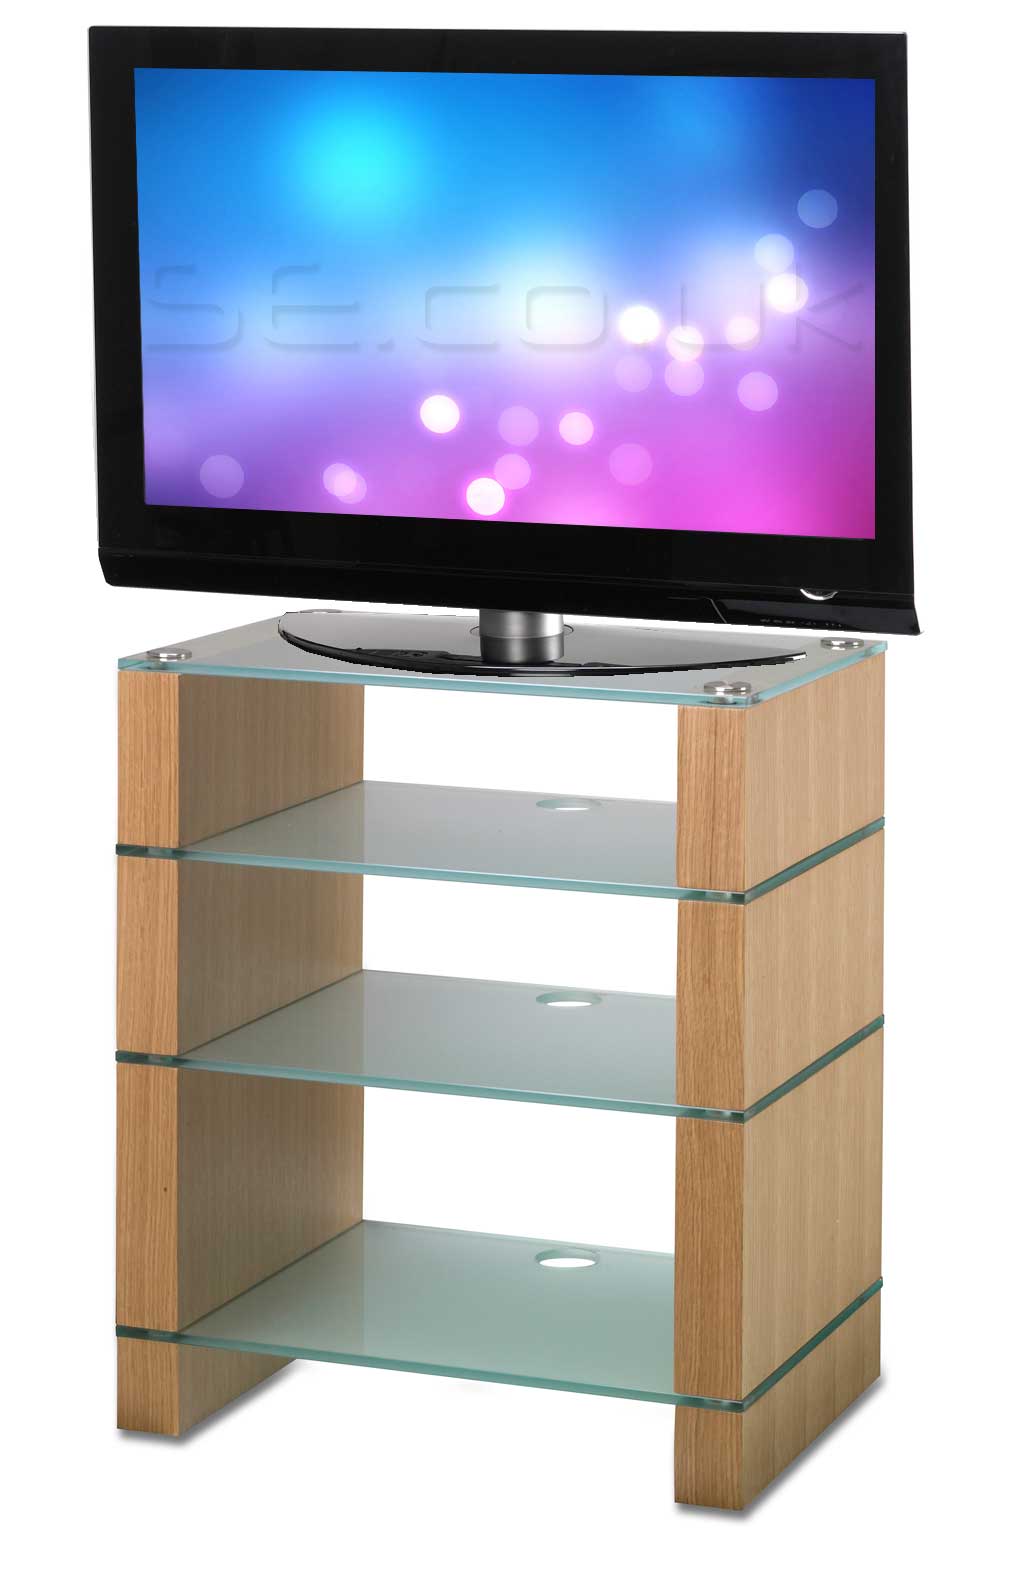 Stax 400 Oak and Etch Glass TV Stand `Stax